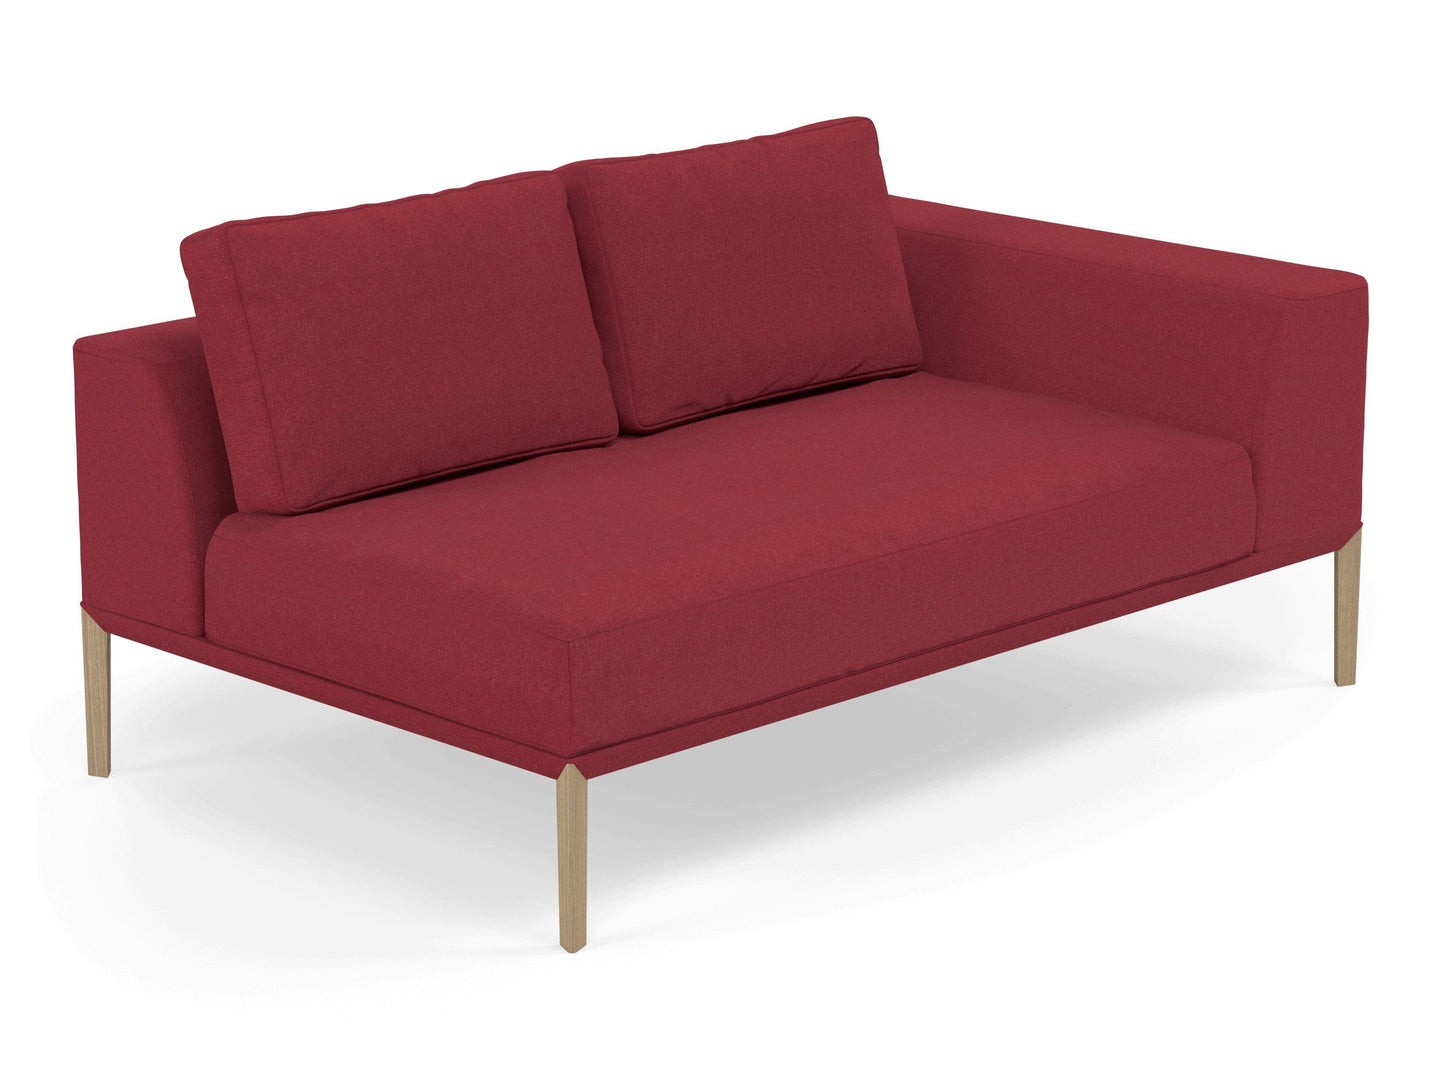 Modern 2 Seater Chaise Lounge Style Sofa with Left Armrest in Rasberry Red Fabric-Distinct Designs (London) Ltd